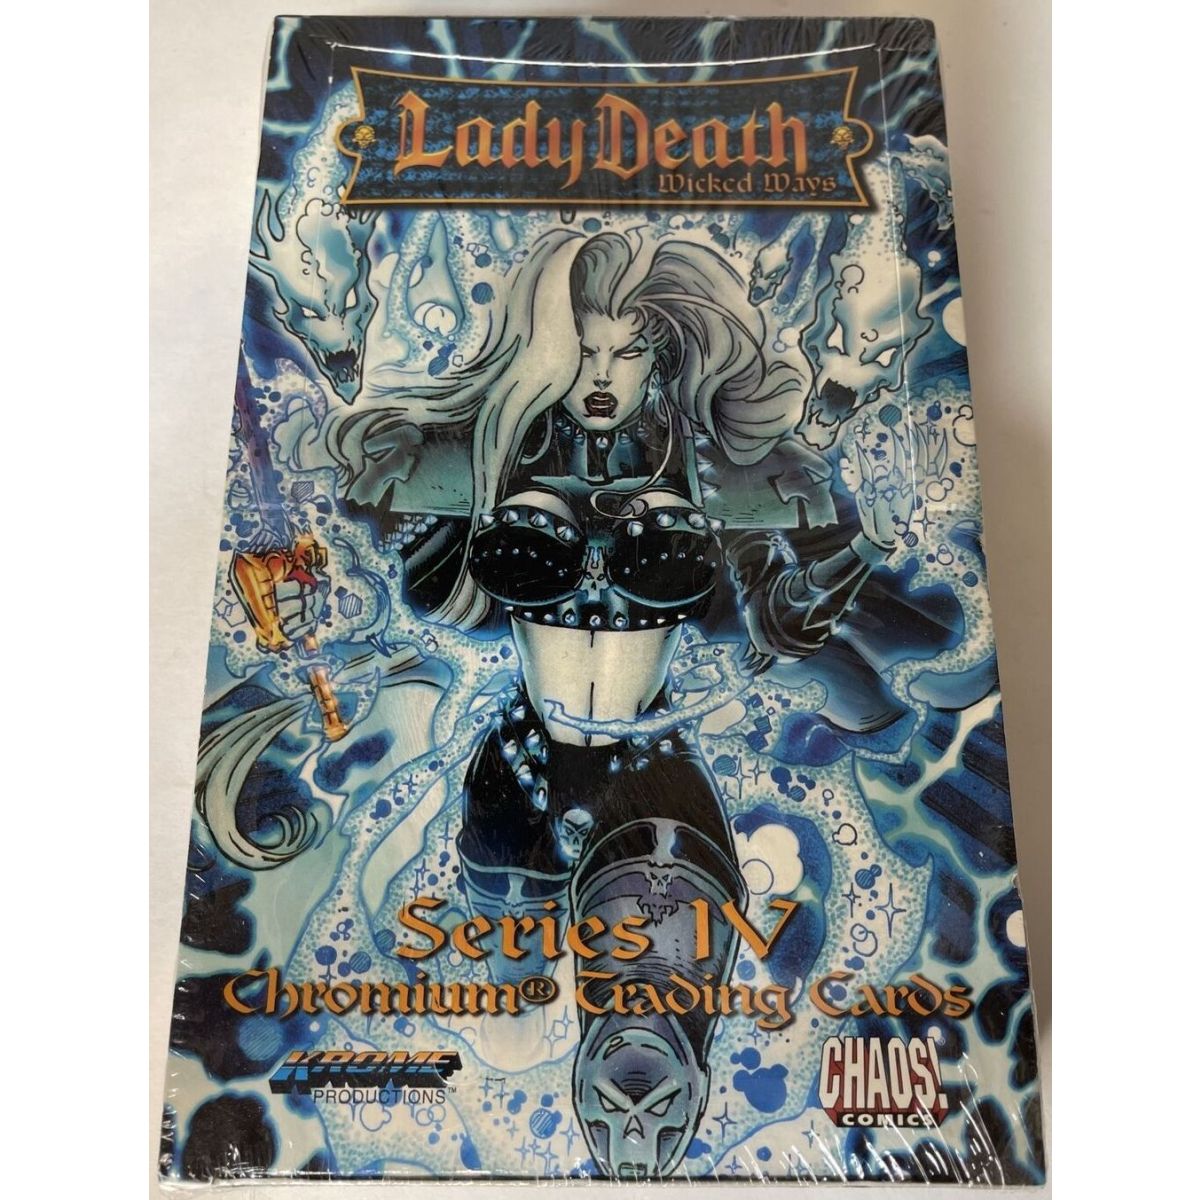 Display Lady Death SERIES IV Krome Productions